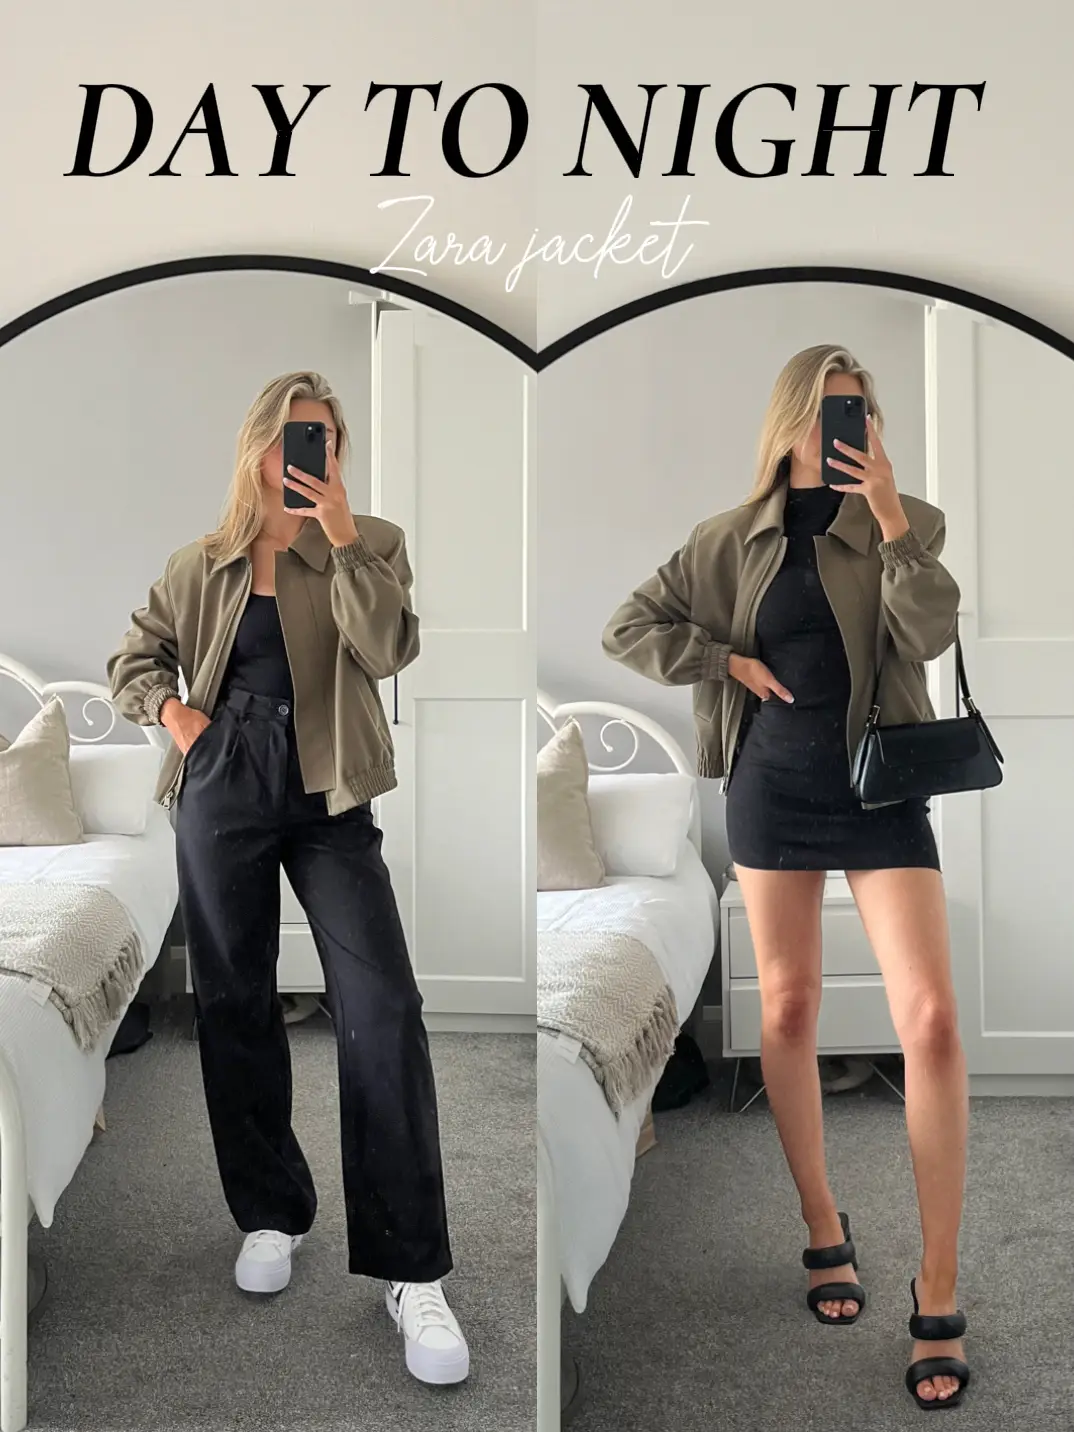 DAY TO NIGHT - ZARA JACKET, Gallery posted by Louisesibley